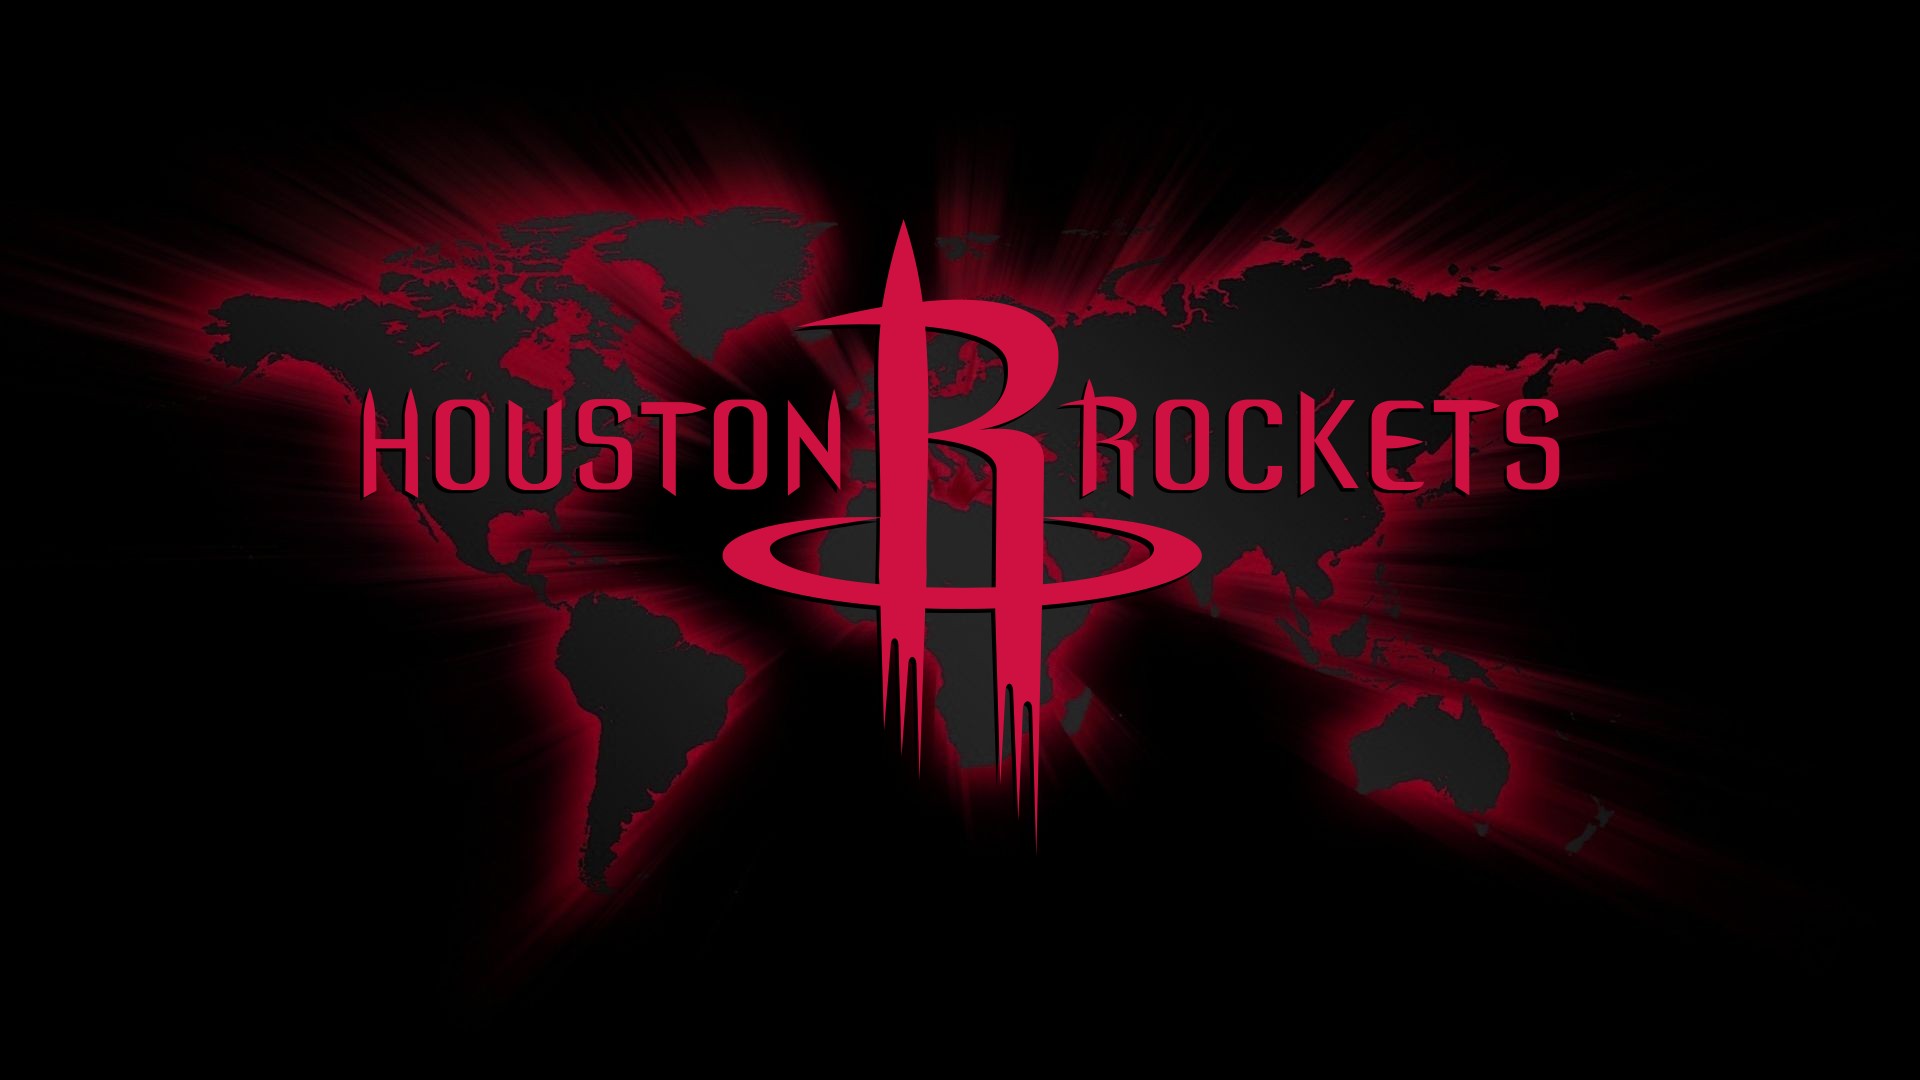 HD Backgrounds Houston Rockets with image dimensions 1920x1080 pixel. You can make this wallpaper for your Desktop Computer Backgrounds, Windows or Mac Screensavers, iPhone Lock screen, Tablet or Android and another Mobile Phone device